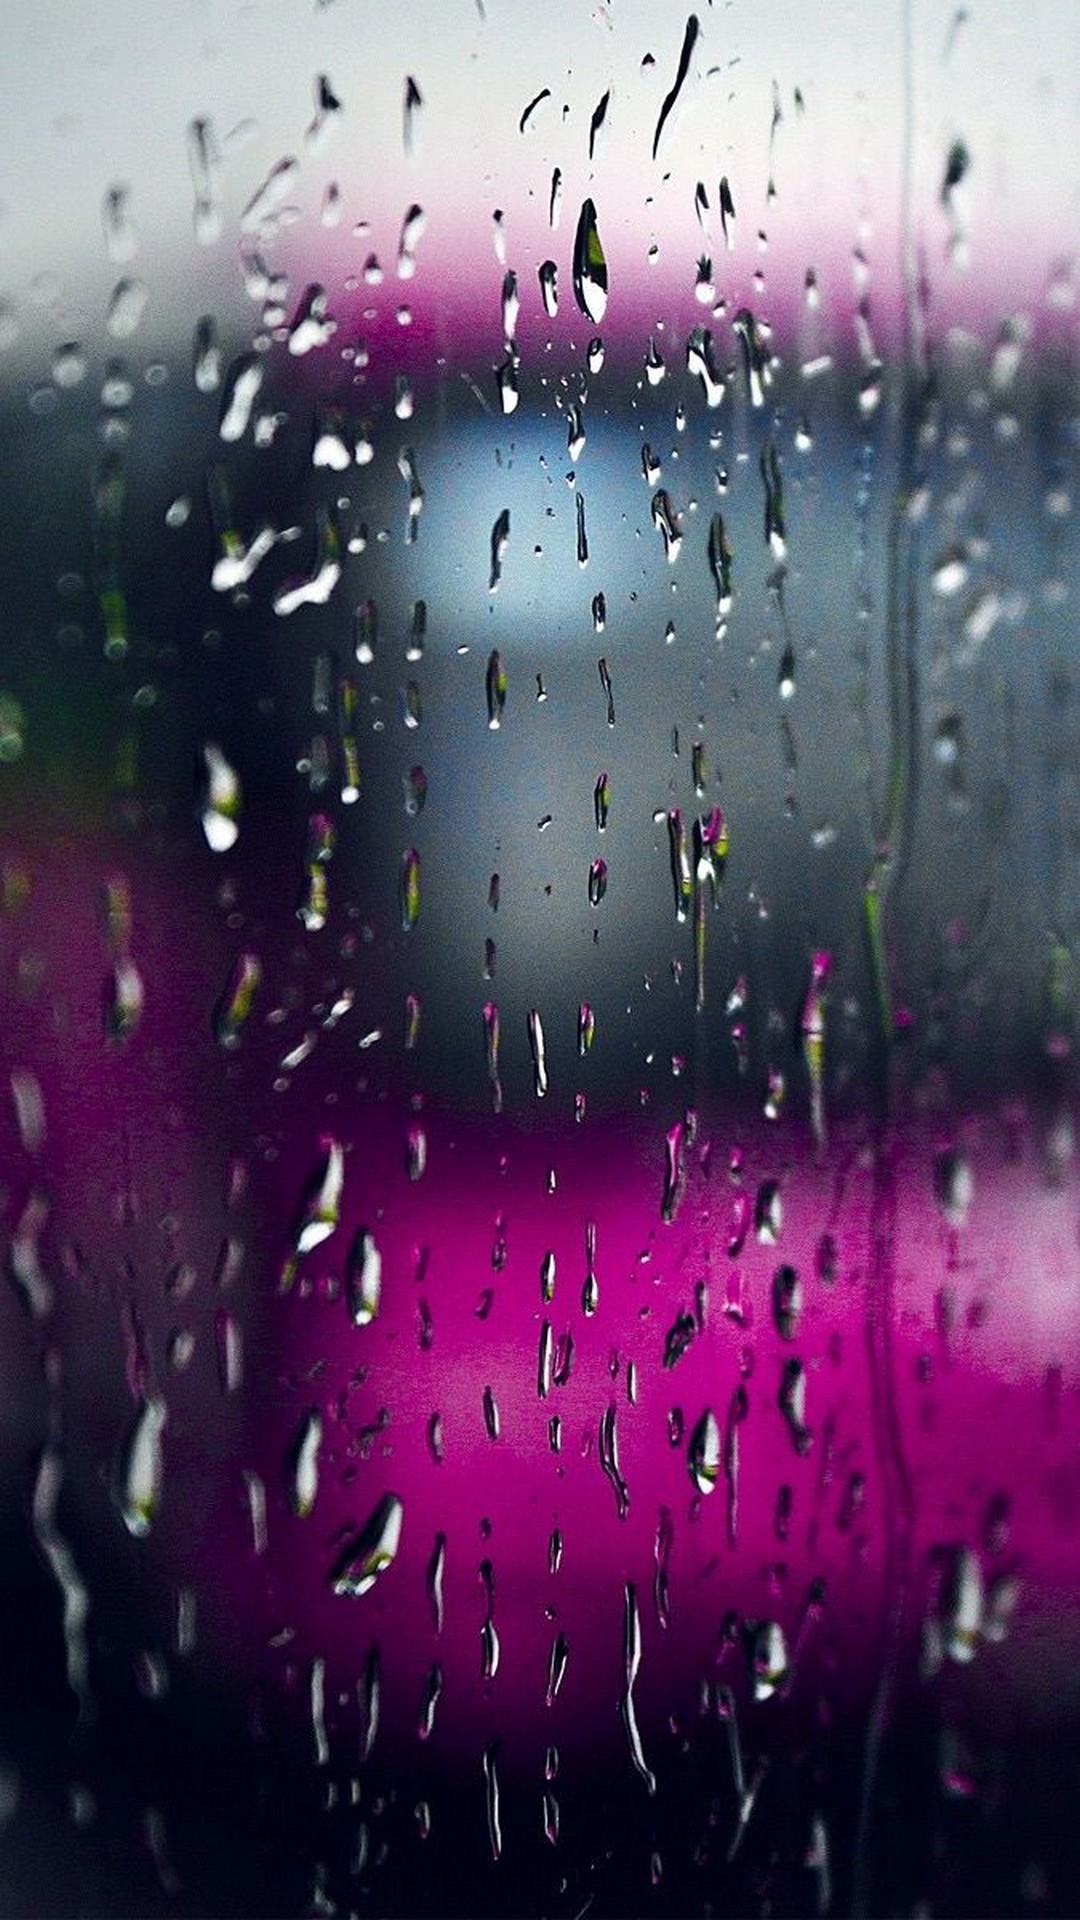 Live Rain Wallpaper For Iphone Resolution - Live Rain Wallpaper 3d - HD Wallpaper 